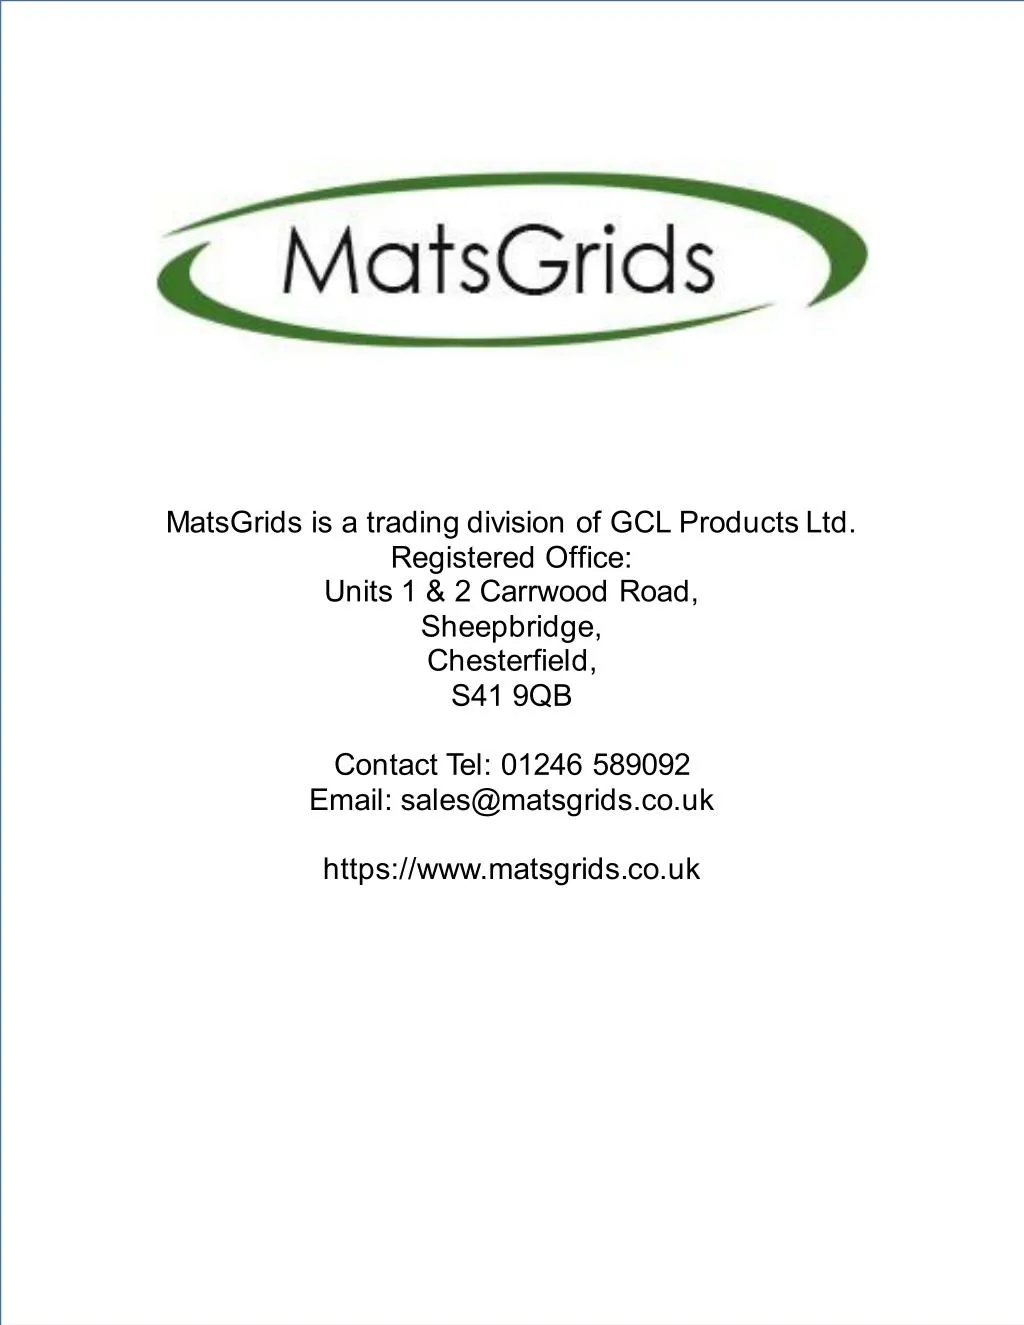 matsgrids is a trading division of gcl products